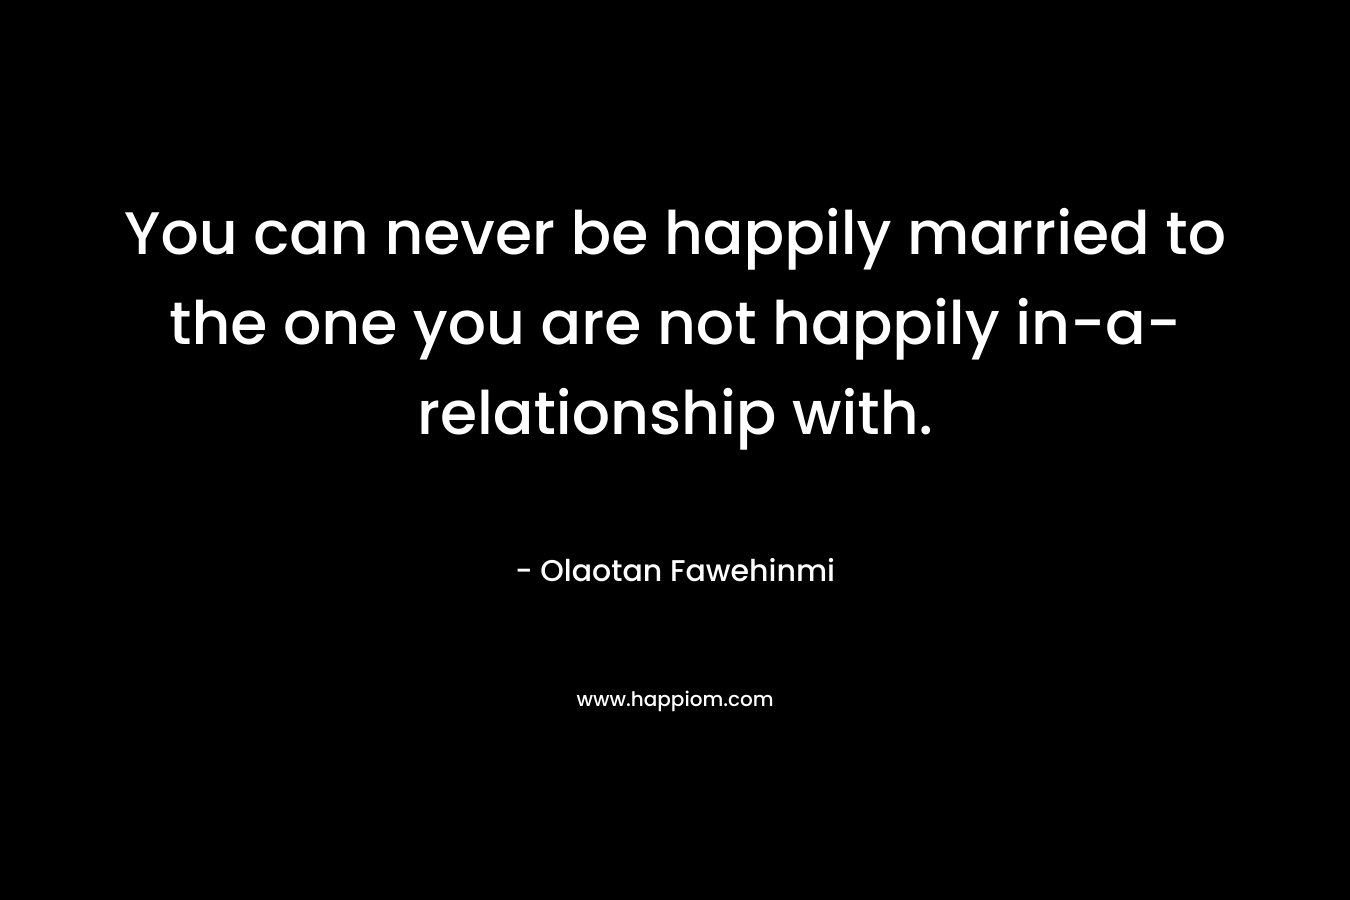 You can never be happily married to the one you are not happily in-a-relationship with.